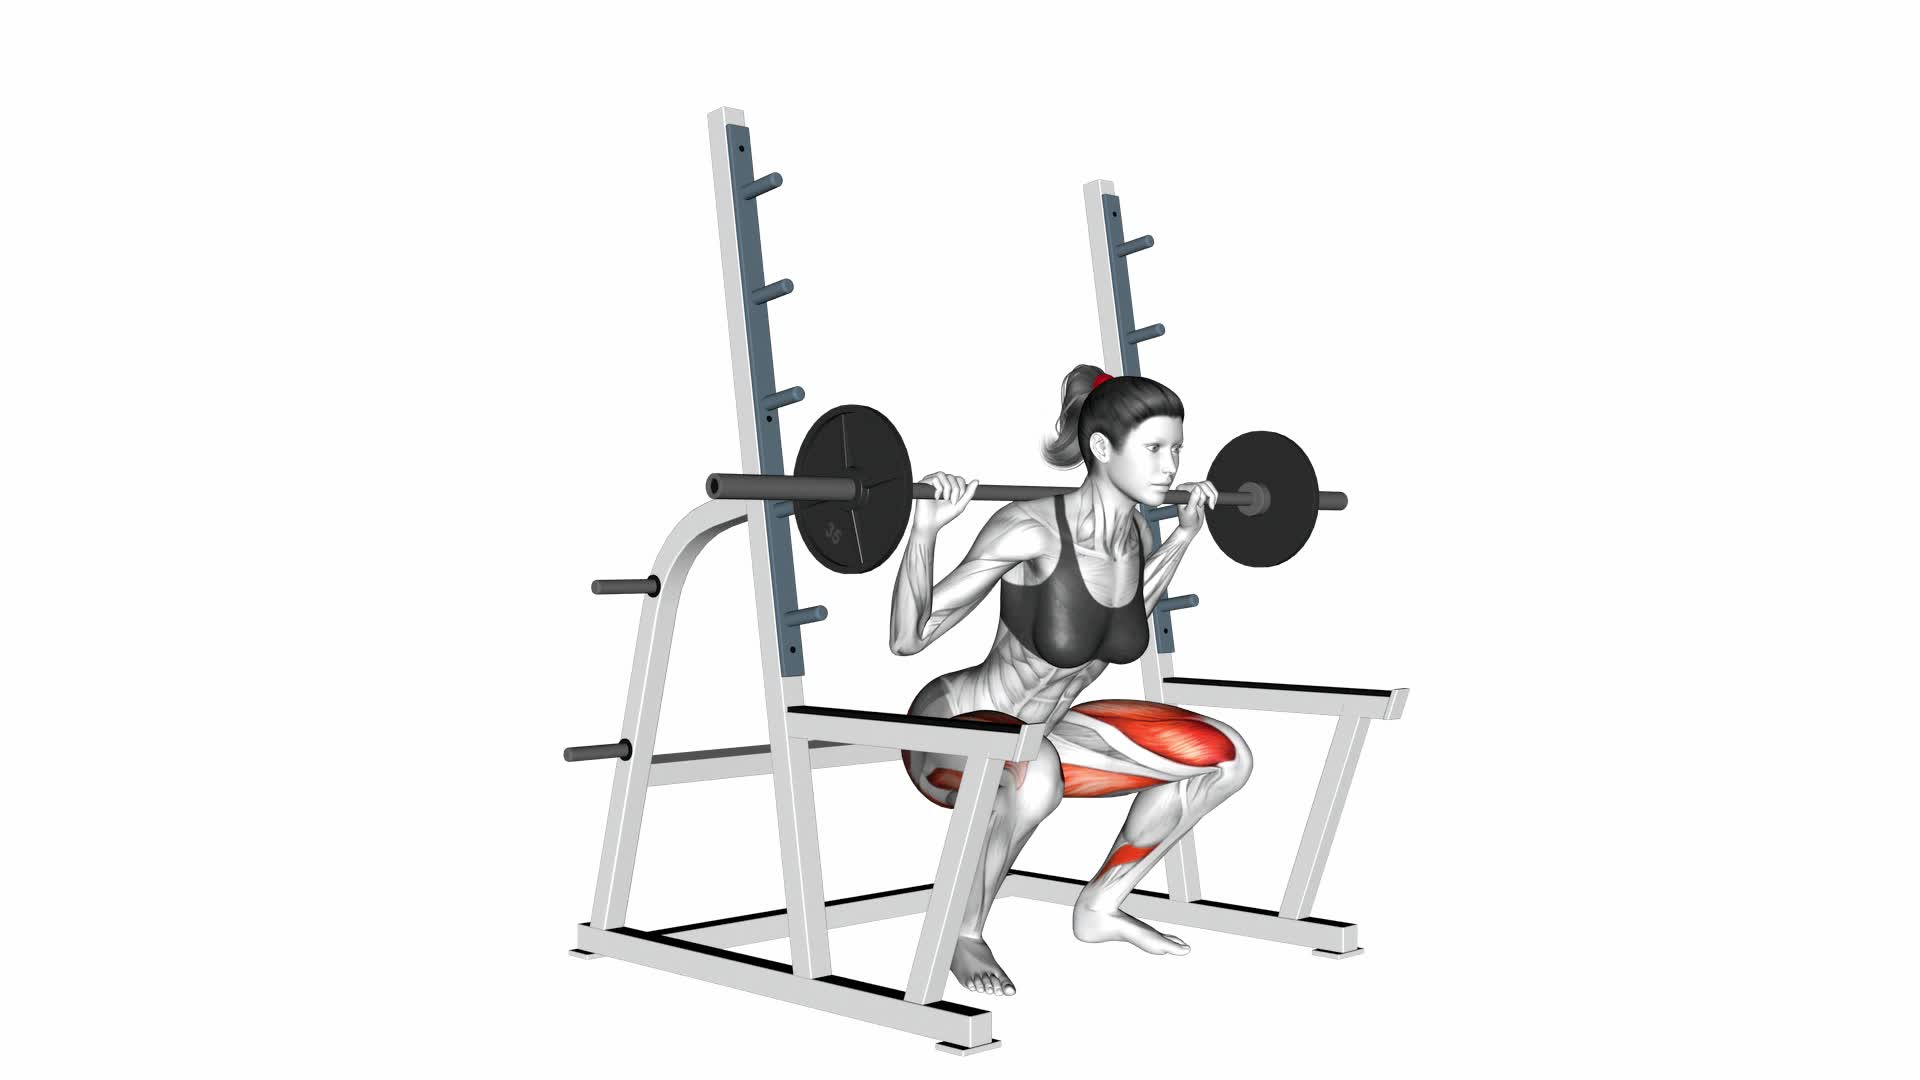 Barbell Full Squat (With Rack) - Video Exercise Guide & Tips